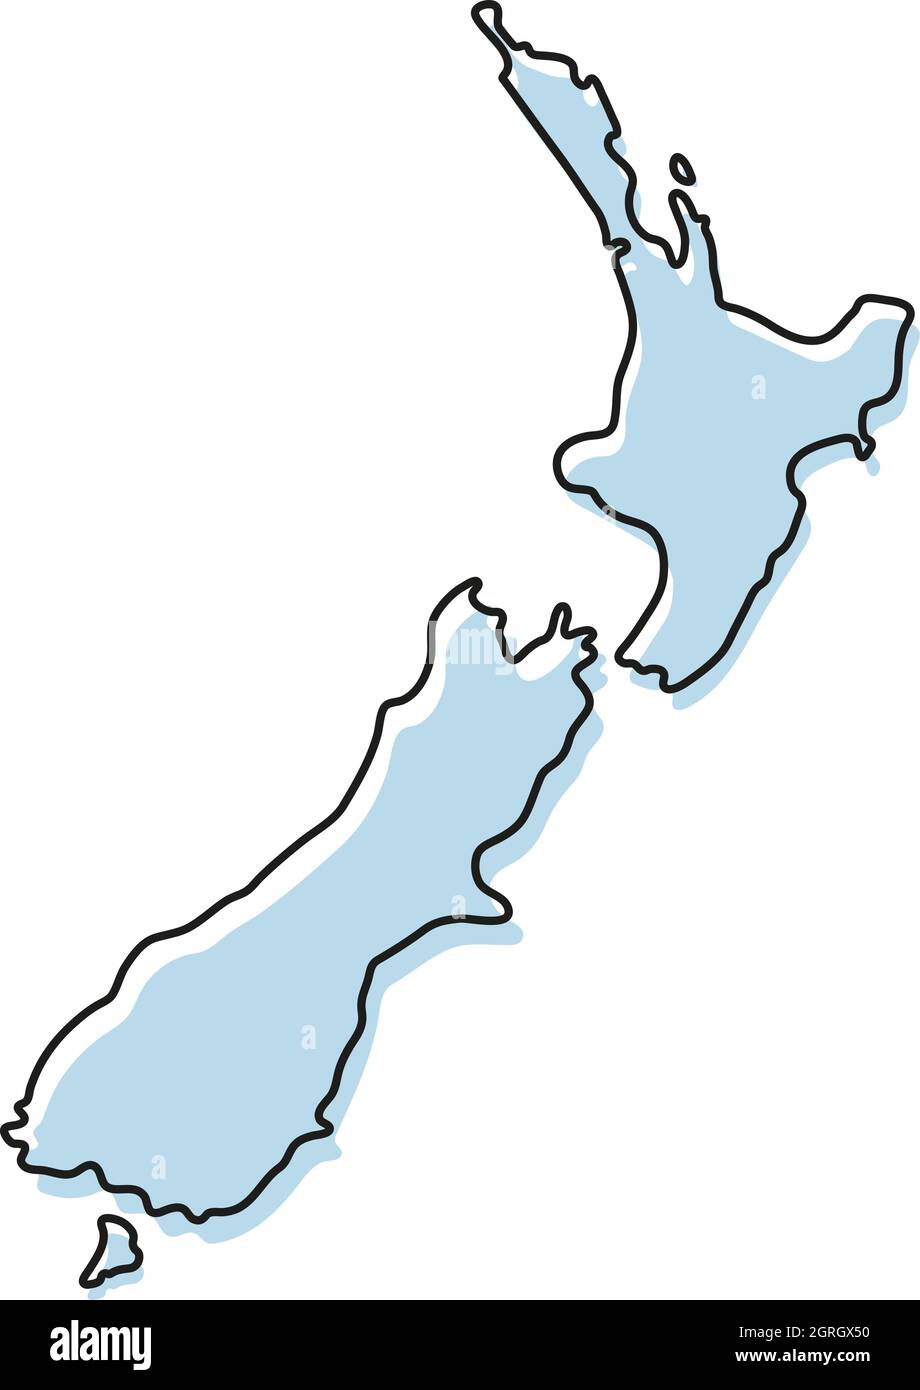 Stylized simple outline map of New Zealand icon. Blue sketch map of New Zealand vector illustration Stock Vector